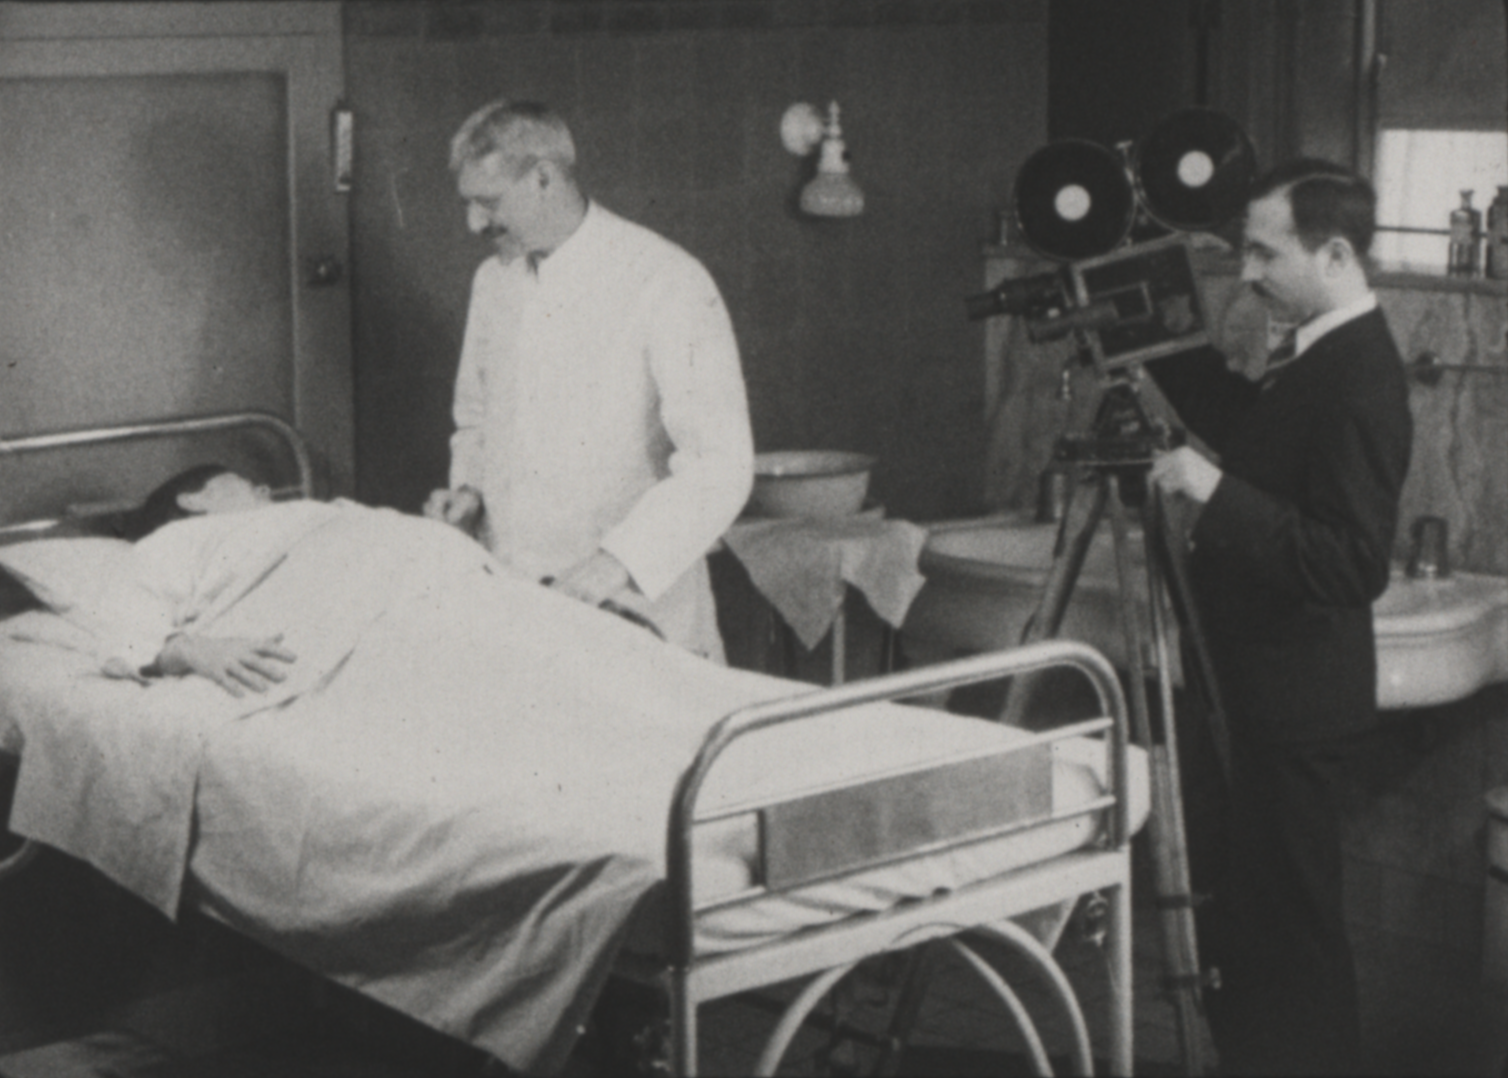 Male Doctor in White coat attending to a woman in labor. Man in a black suit to the right filming the process.